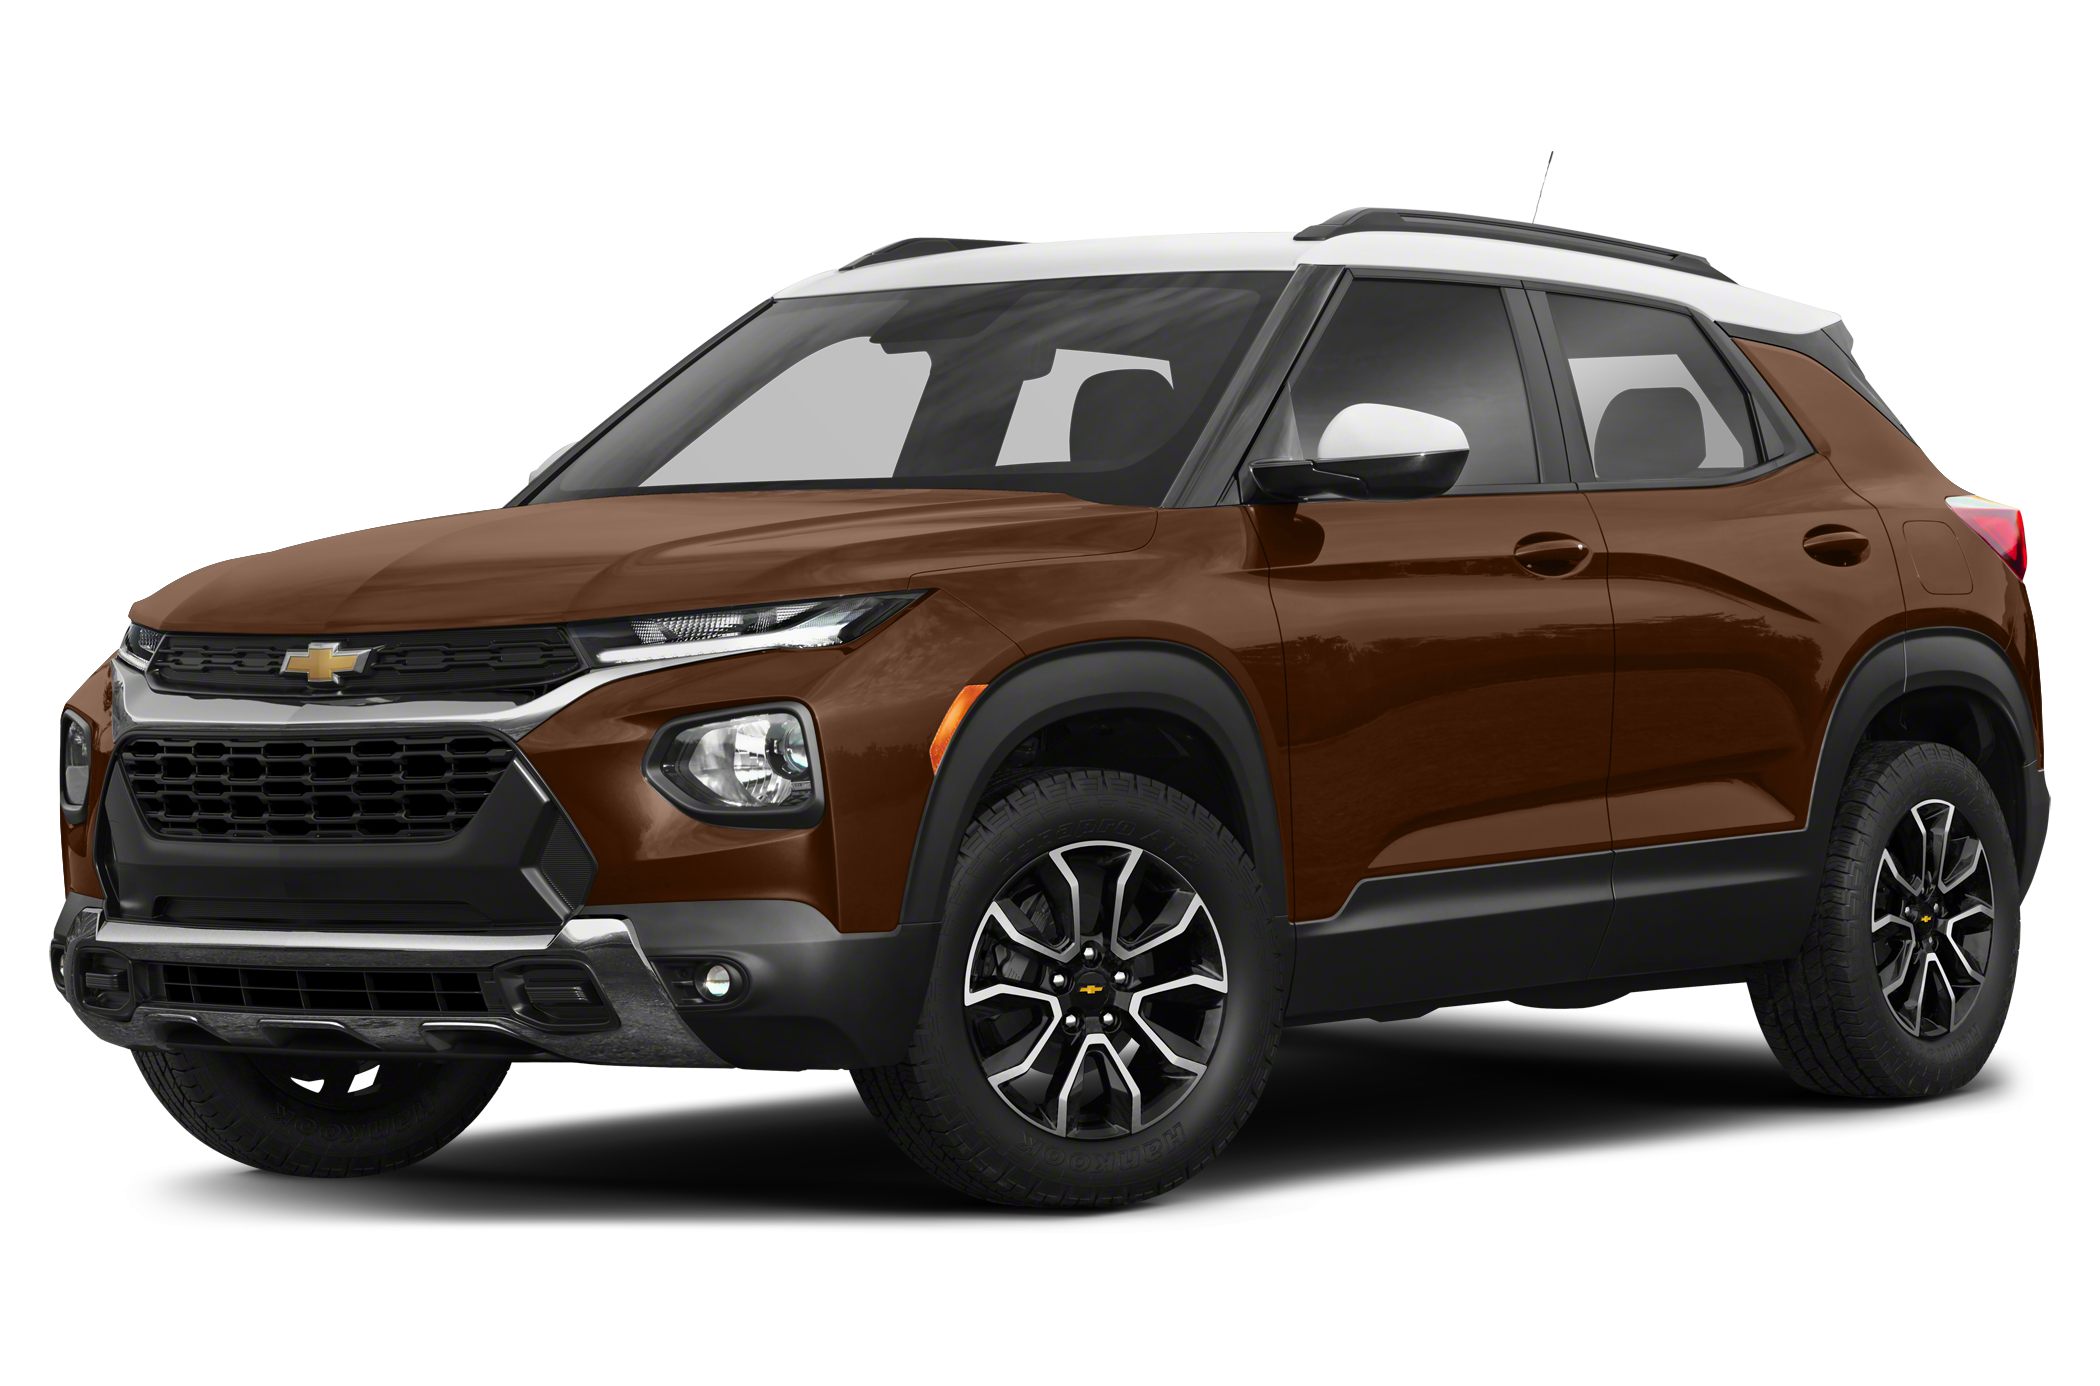 2021 Chevrolet Trailblazer Rs Front Wheel Drive Pictures